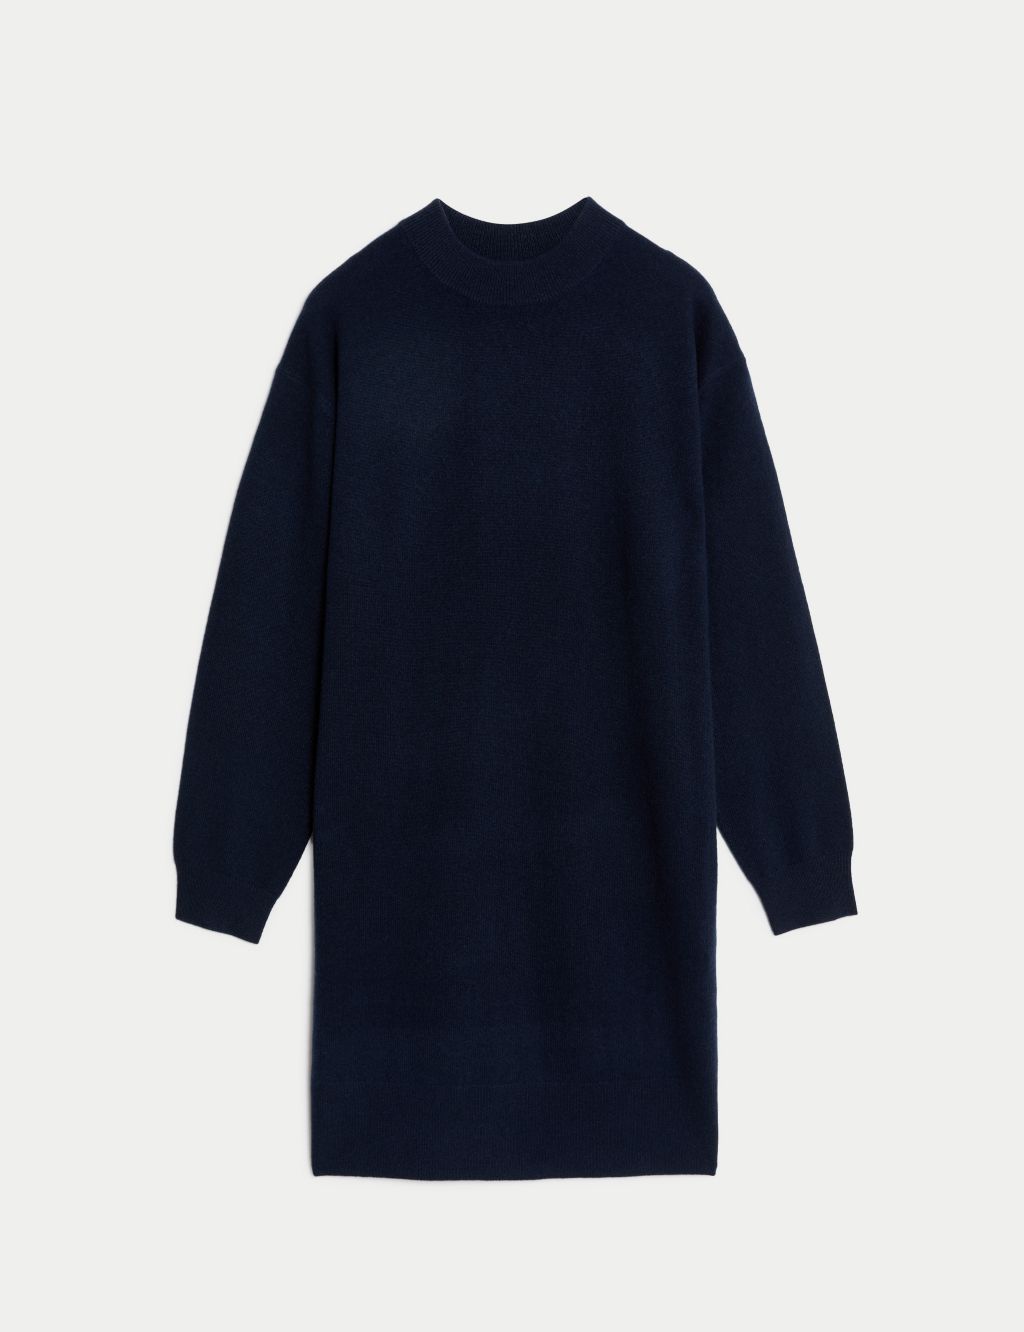 Pure Cashmere Crew Neck Mini Knitted Dress image 1